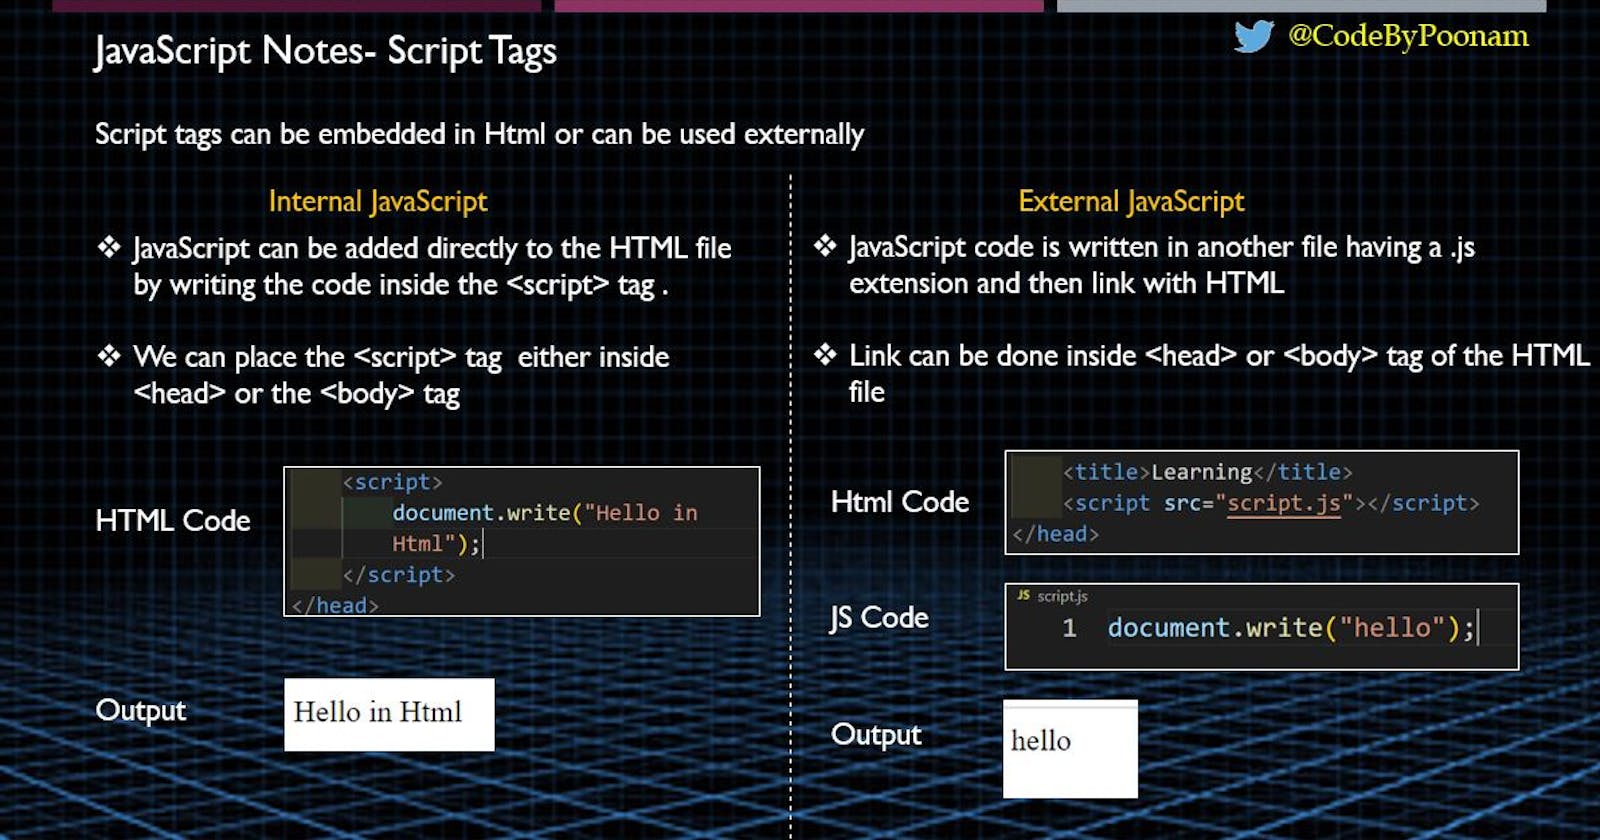 All about JavaScript
Day 1: JavaScript embedded in HTML or External JS